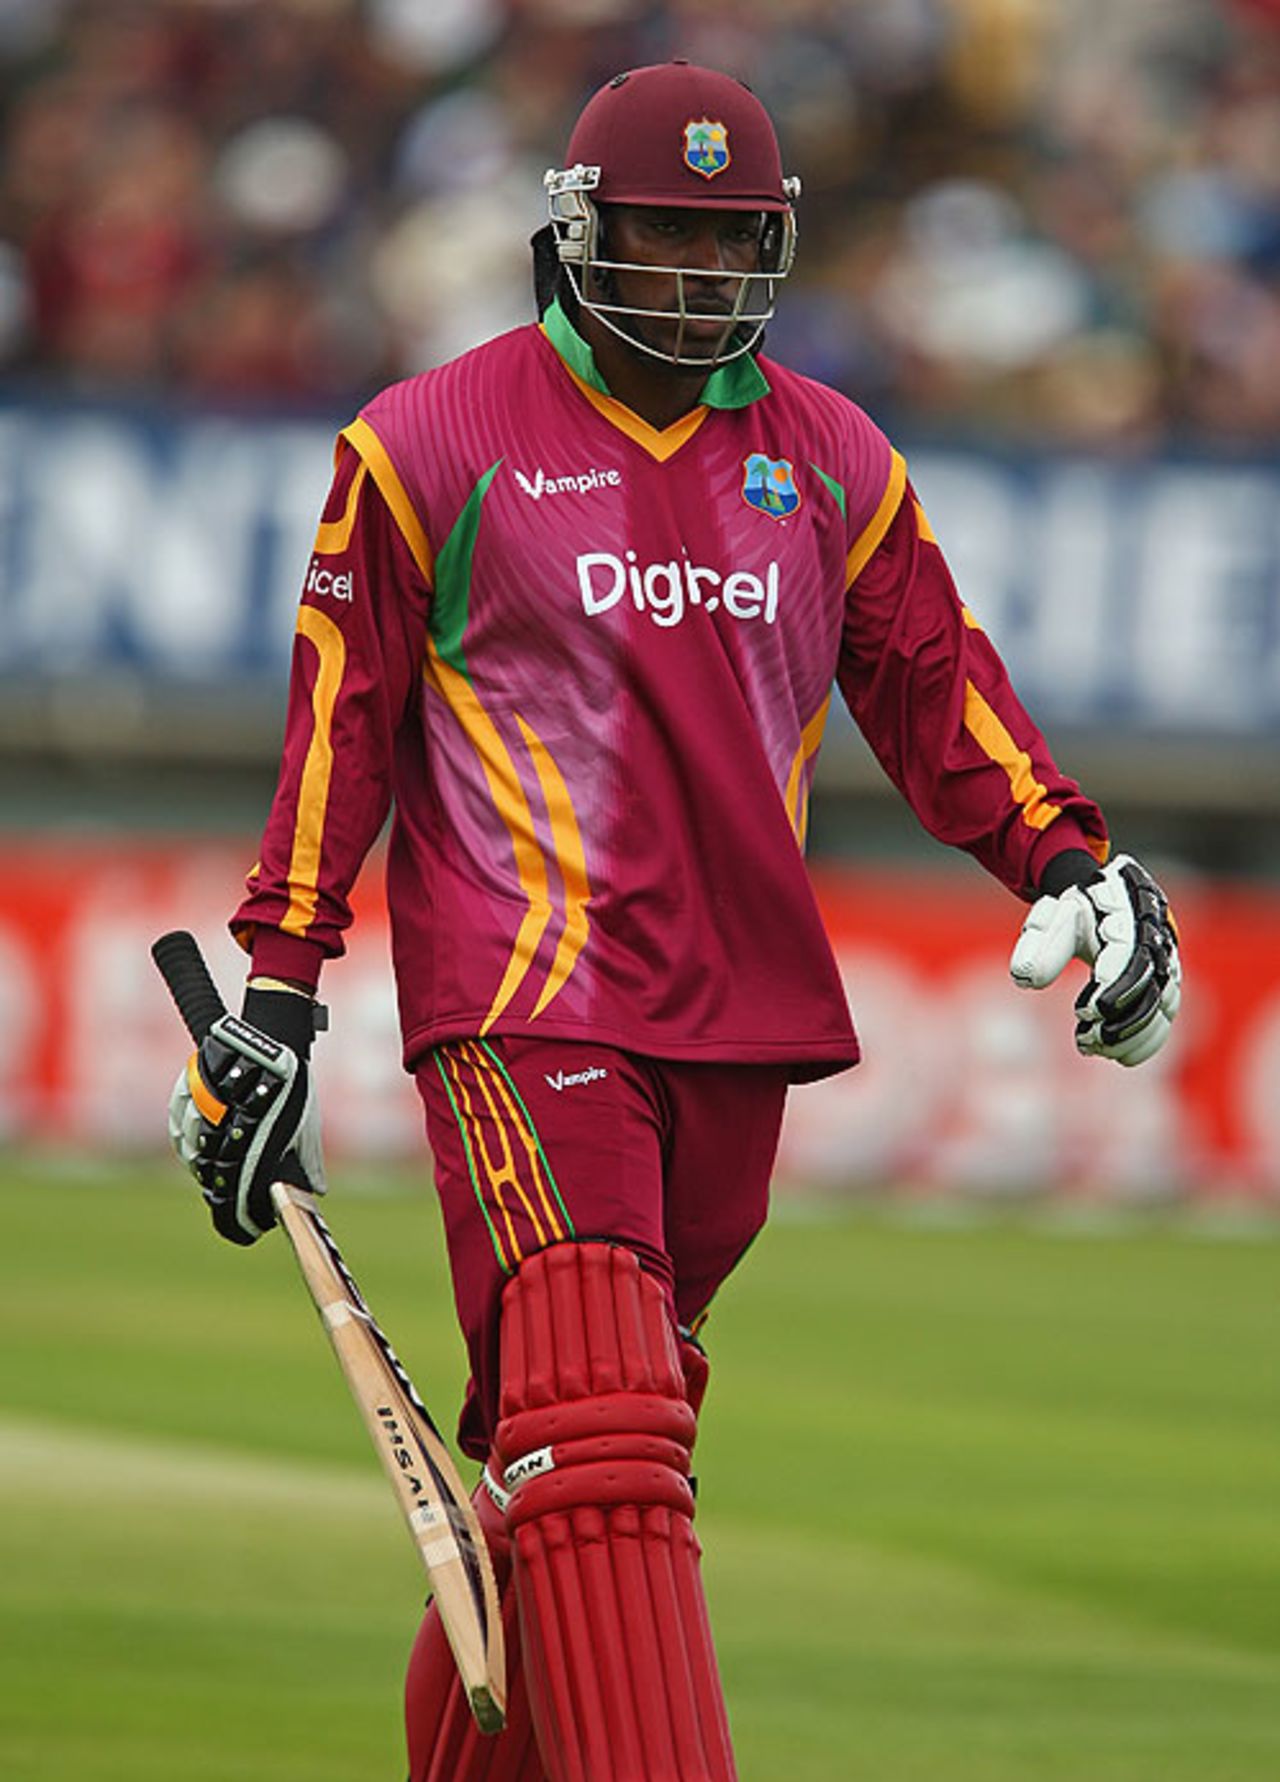 Chris Gayle stalks back to the dressing room after his early dismissal, England v West Indies, 3rd ODI, Edgbaston, May 26, 2009